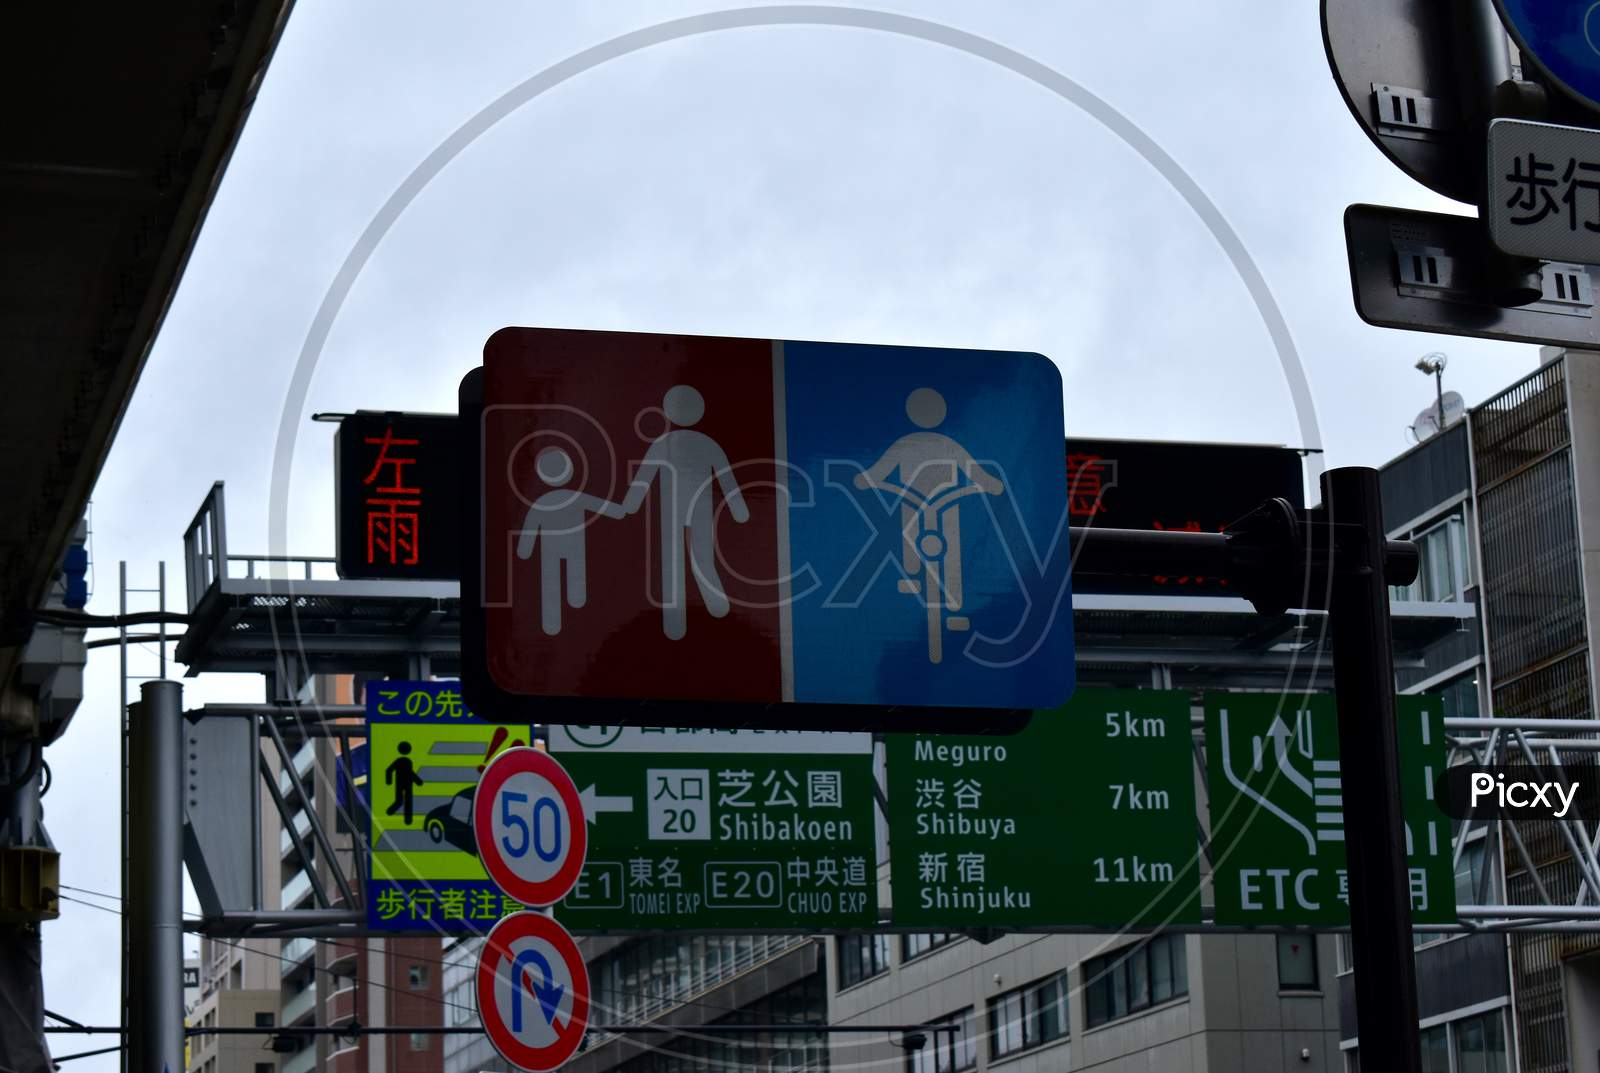 The interesting traffic signs of people in Tokyo Japan